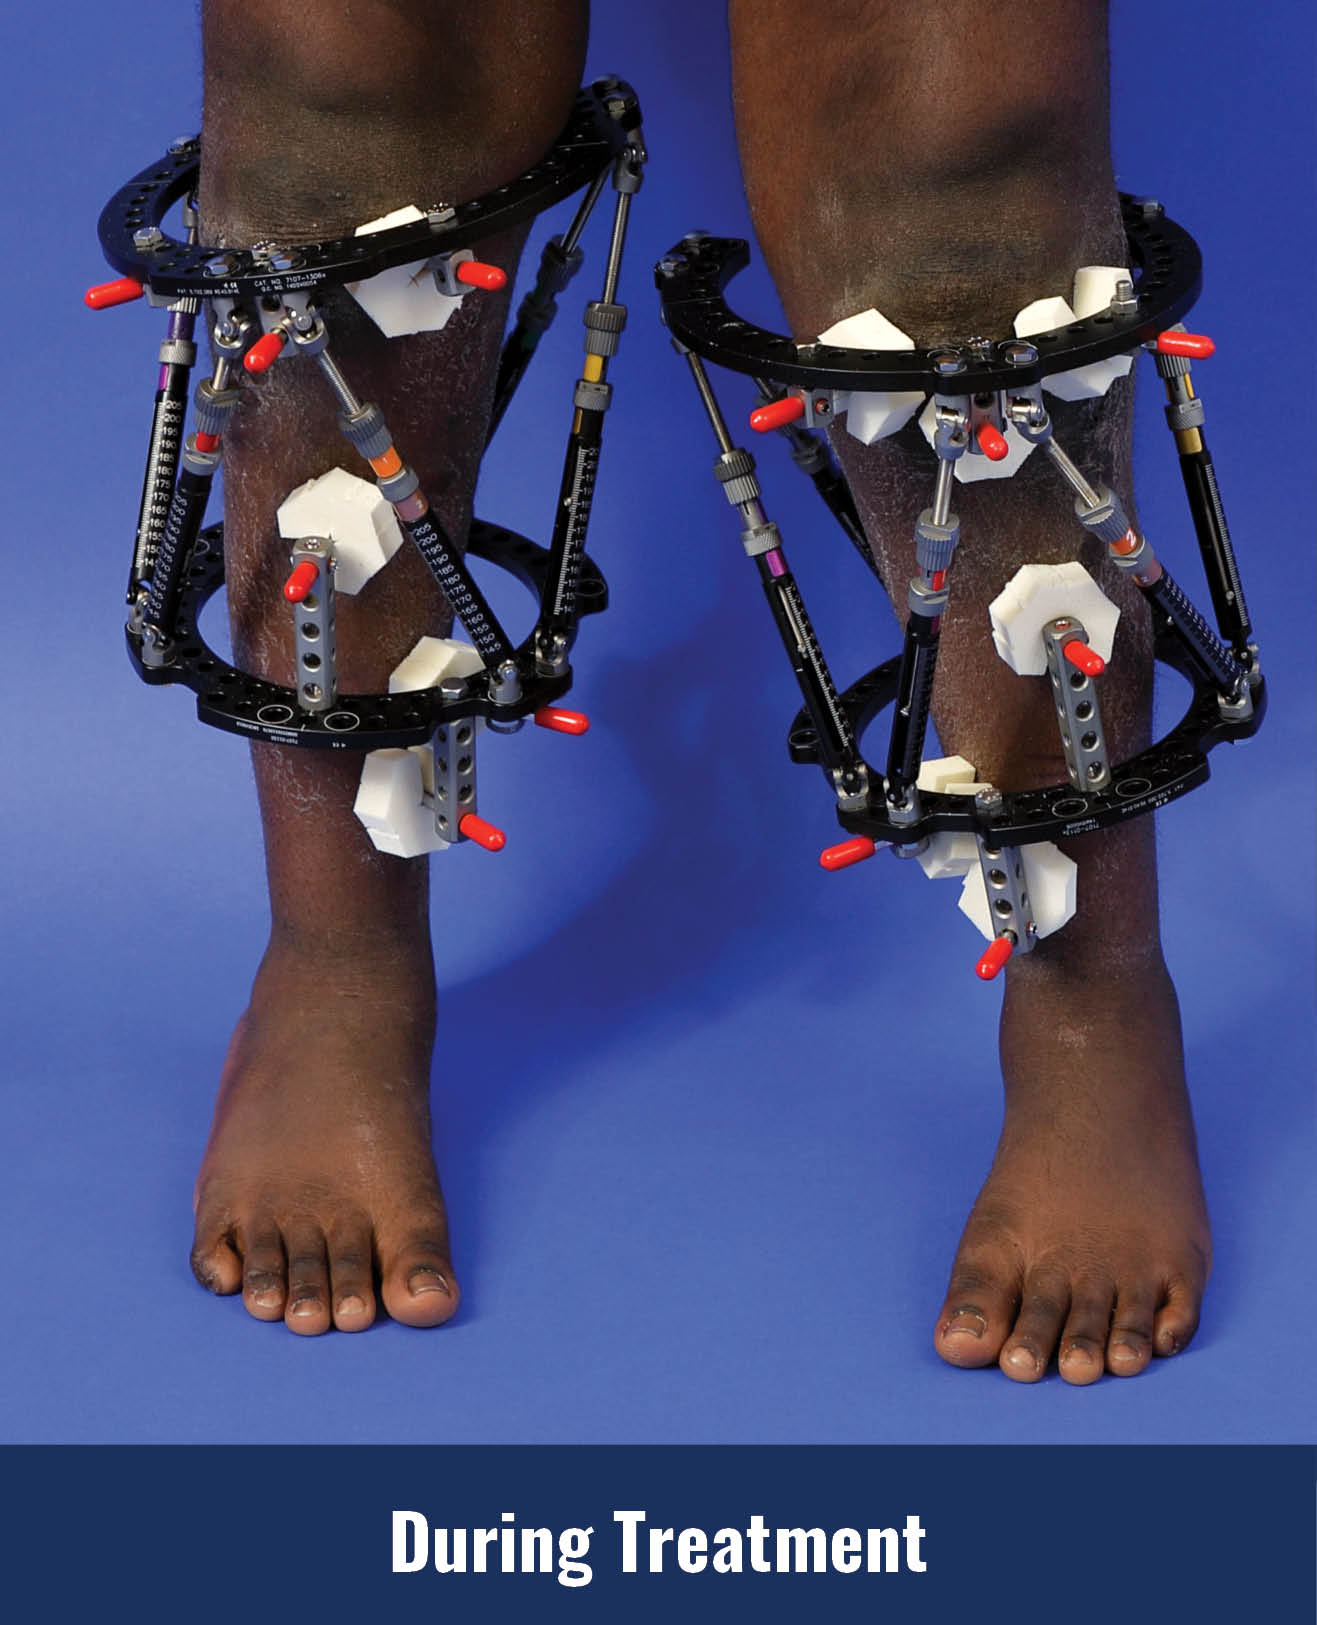 Success after surgery for Blount disease and bowlegs, showing his legs straightened with external fixators applied to them.